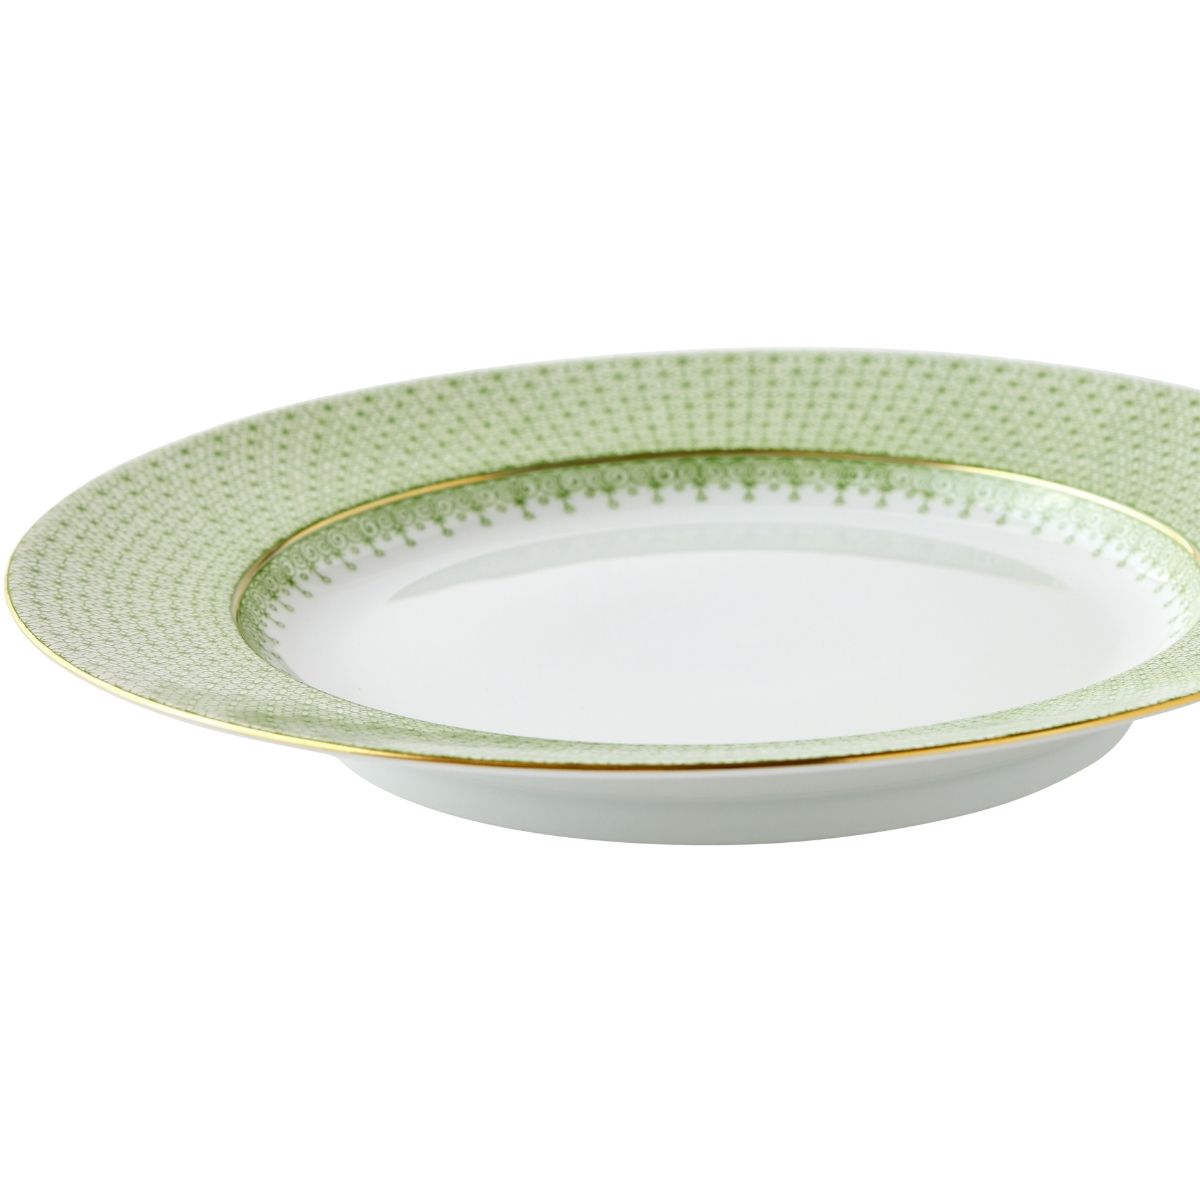 Tea Green Lace 5 Piece Place Setting